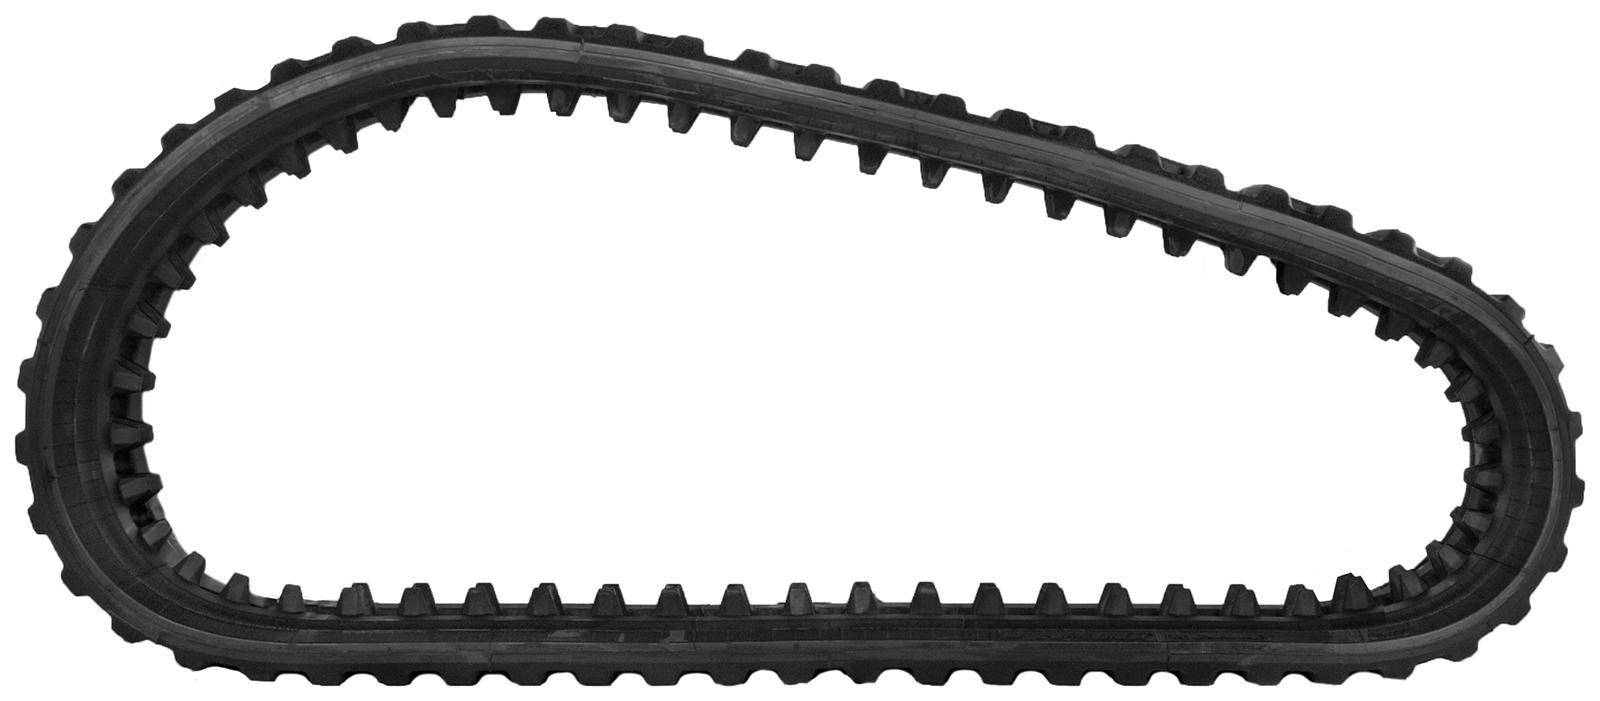 set of 2 18" camso extreme duty hxd pattern rubber track (450x86bx58)